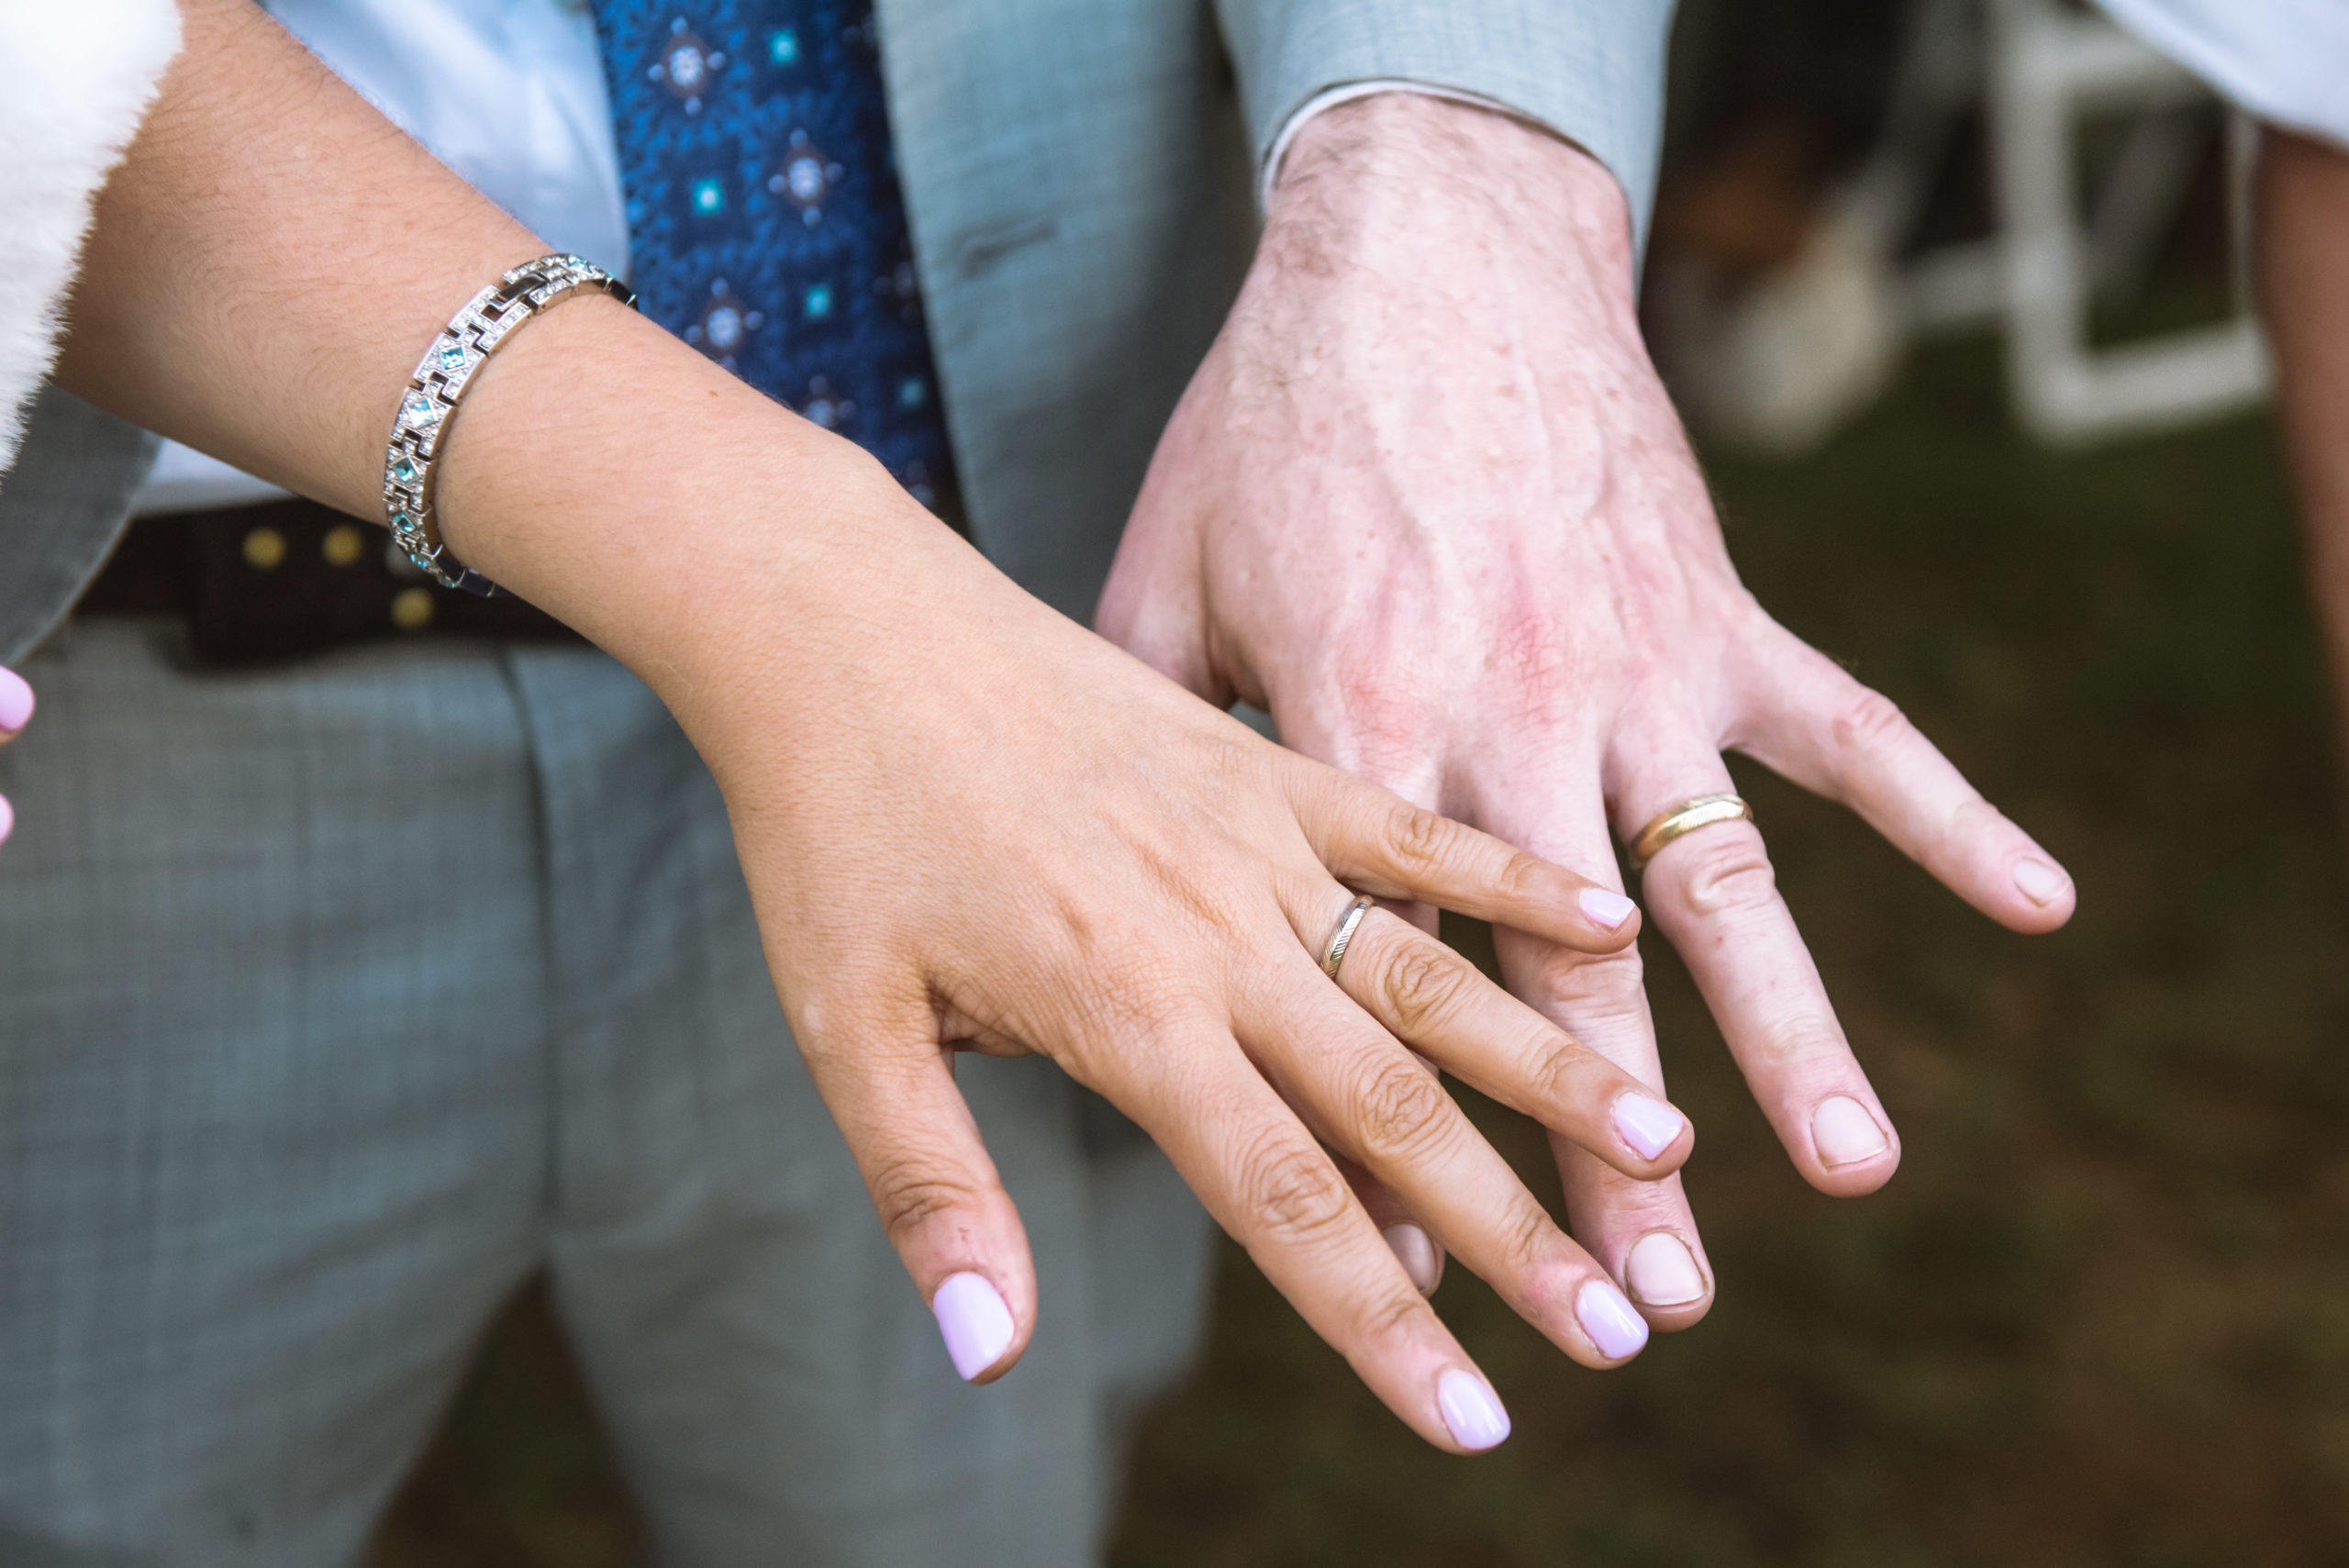 Close up photo of the bride and groom's hands showing off their rings.